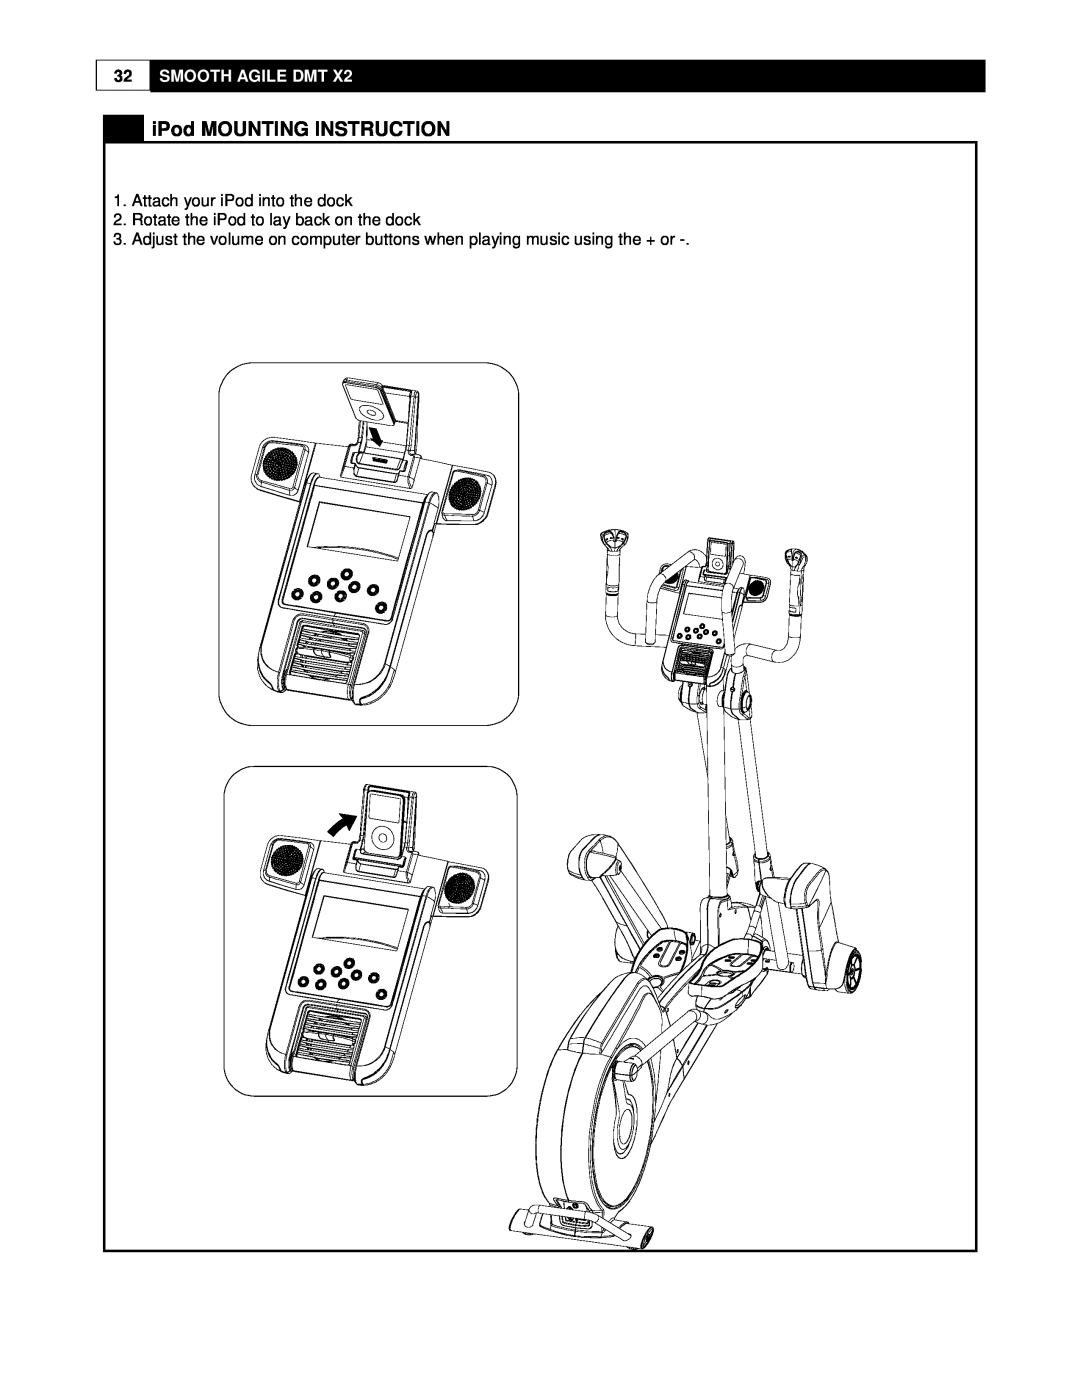 Smooth Fitness DMT X2 user manual iPod MOUNTING INSTRUCTION, Smooth Agile Dmt, Attach your iPod into the dock 